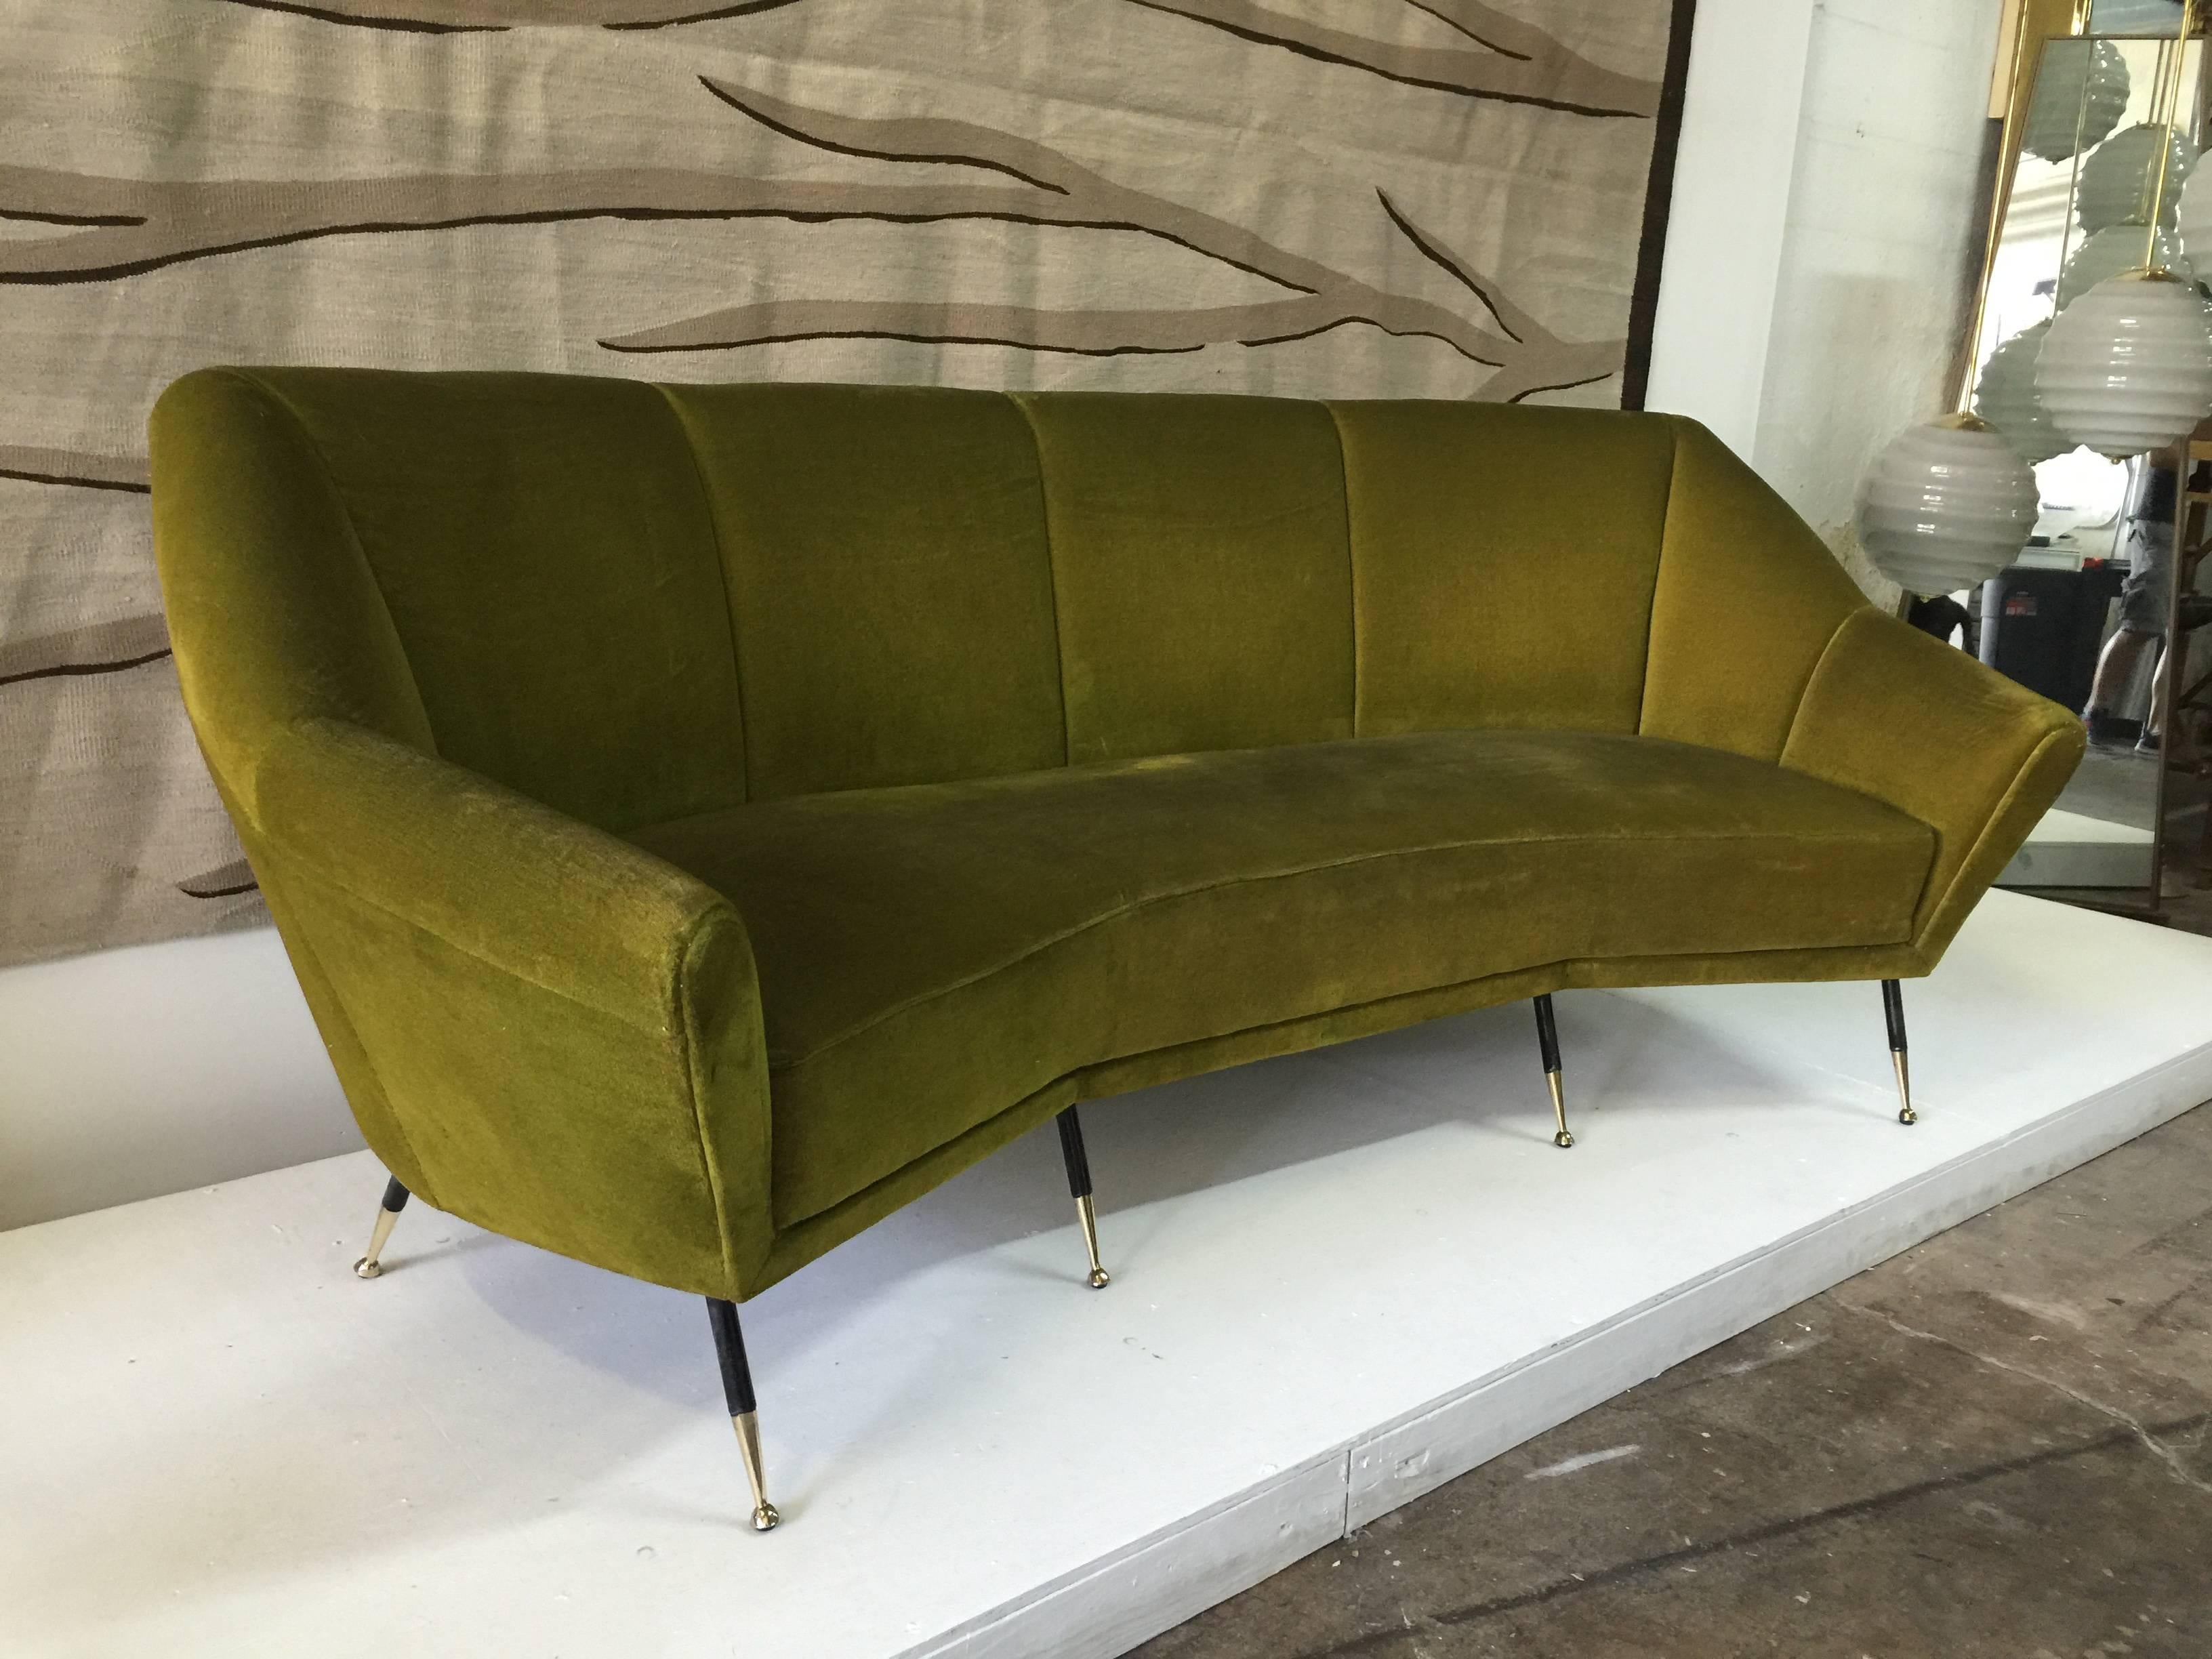 All vintage, original green velvet in very nice "ready to use" condition, this slightly curved sofa just arrived from Italy. This is the original condition, we can reupholster with your fabric at additional cost.

Geometric design and